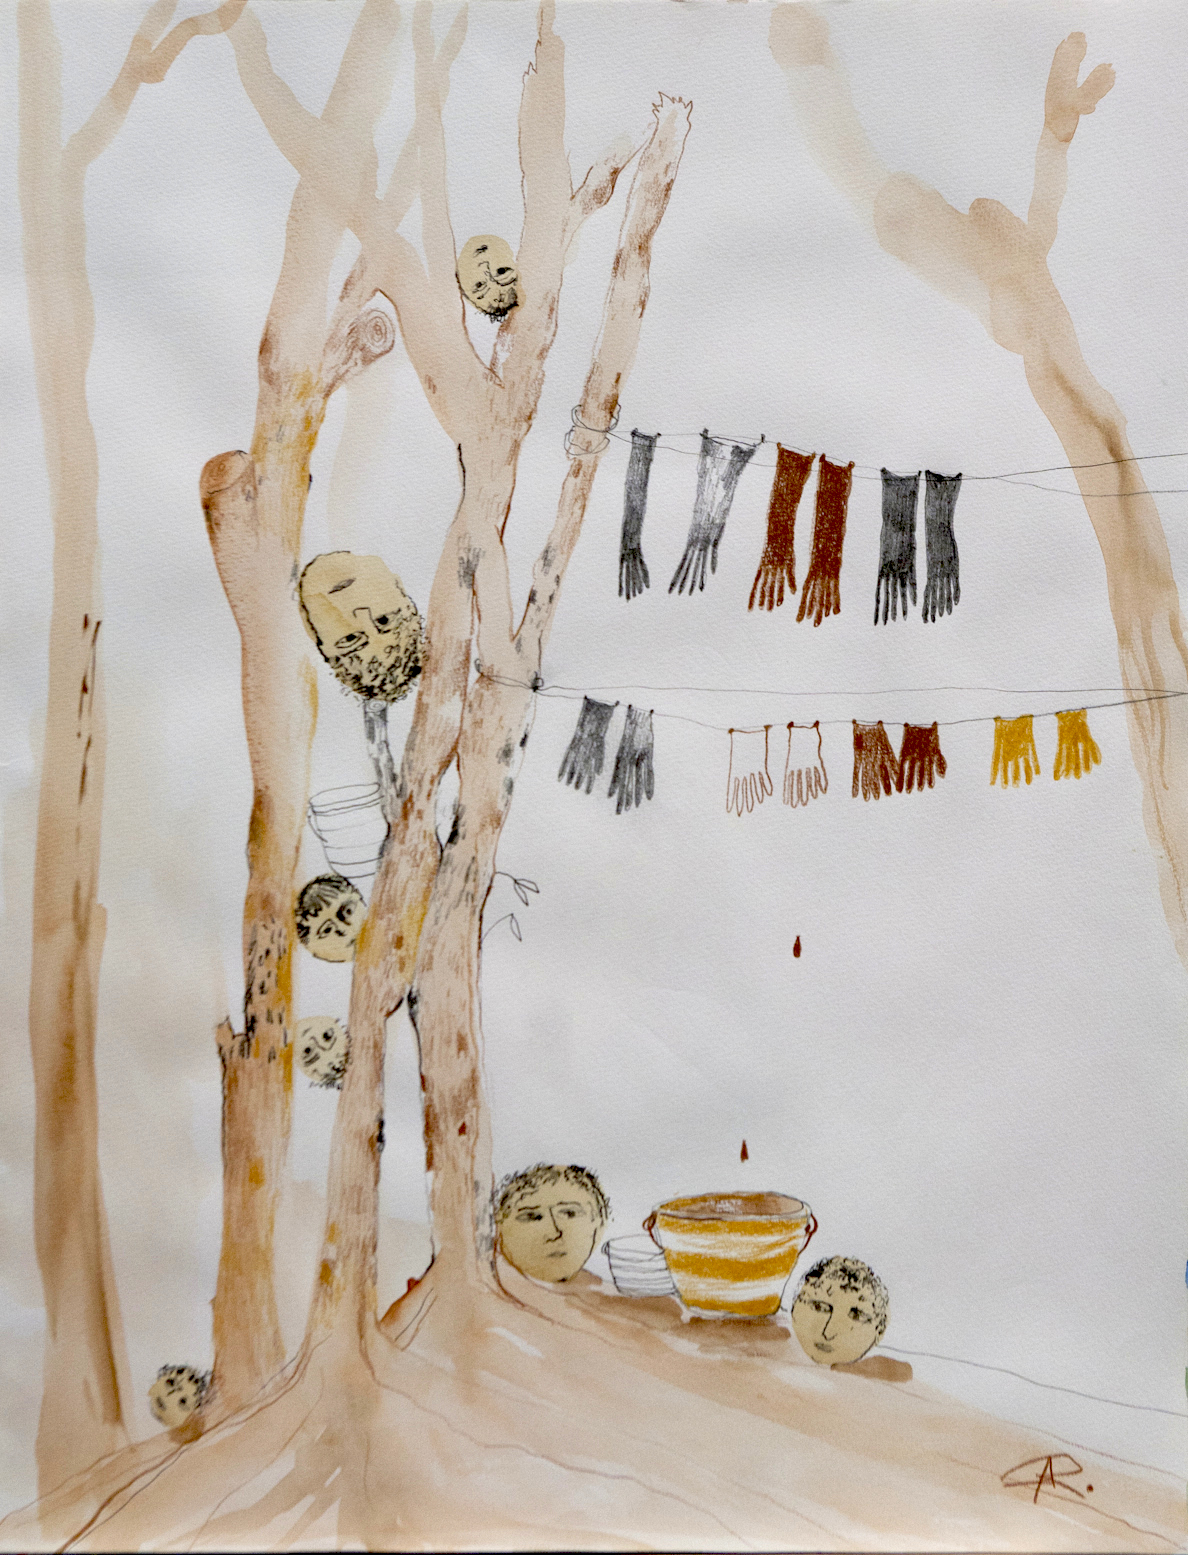  Alexandra Rozenman,  “Clean Hands”   Watercolor and crayon on paper, 24 x 36 inches 